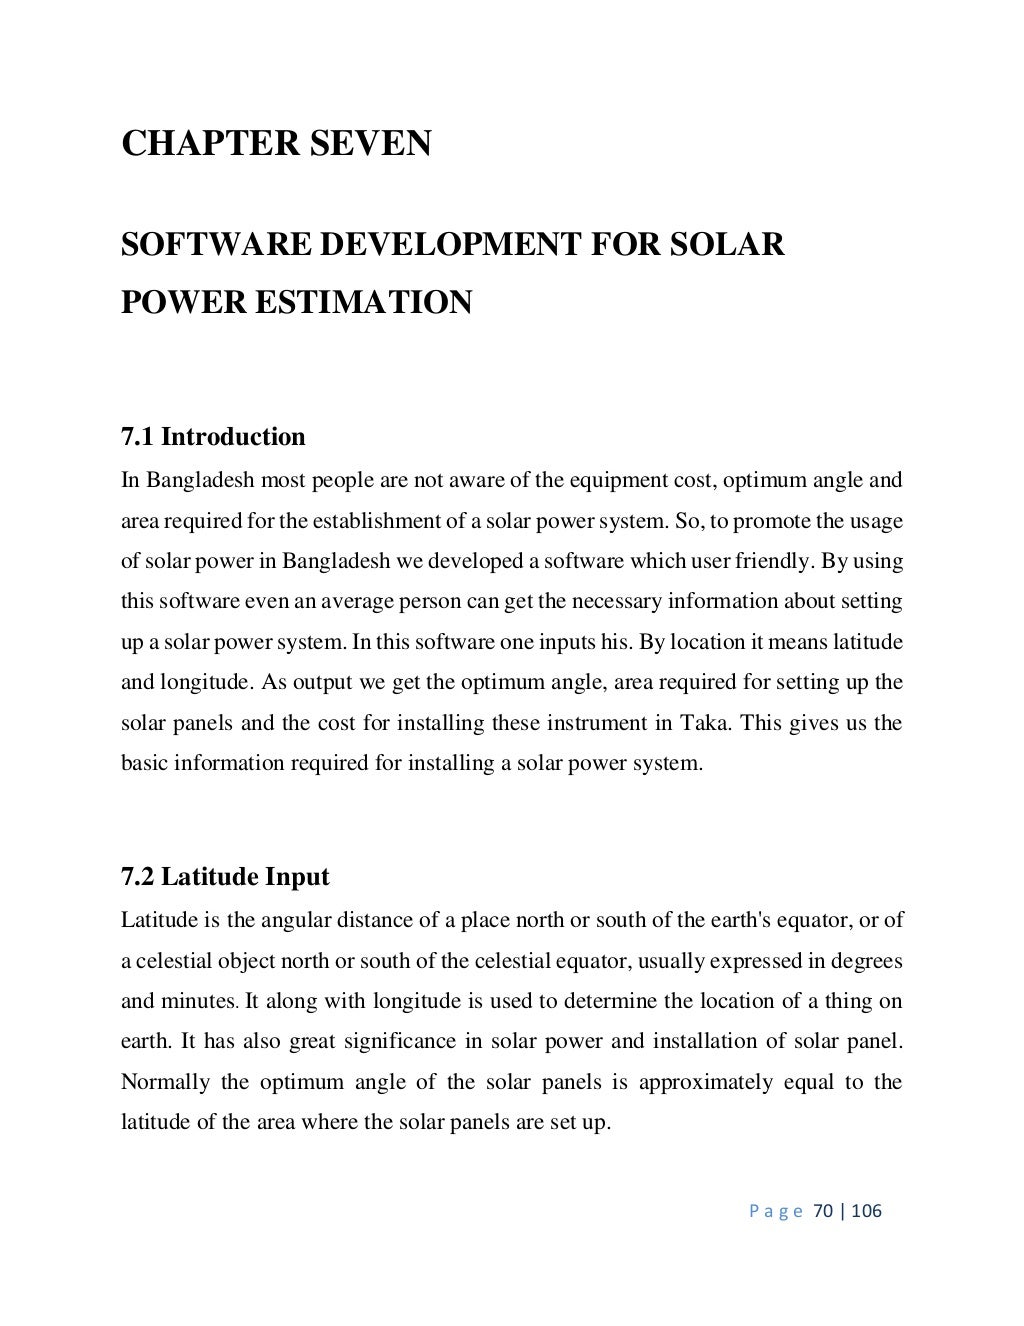 thesis paper on solar cell